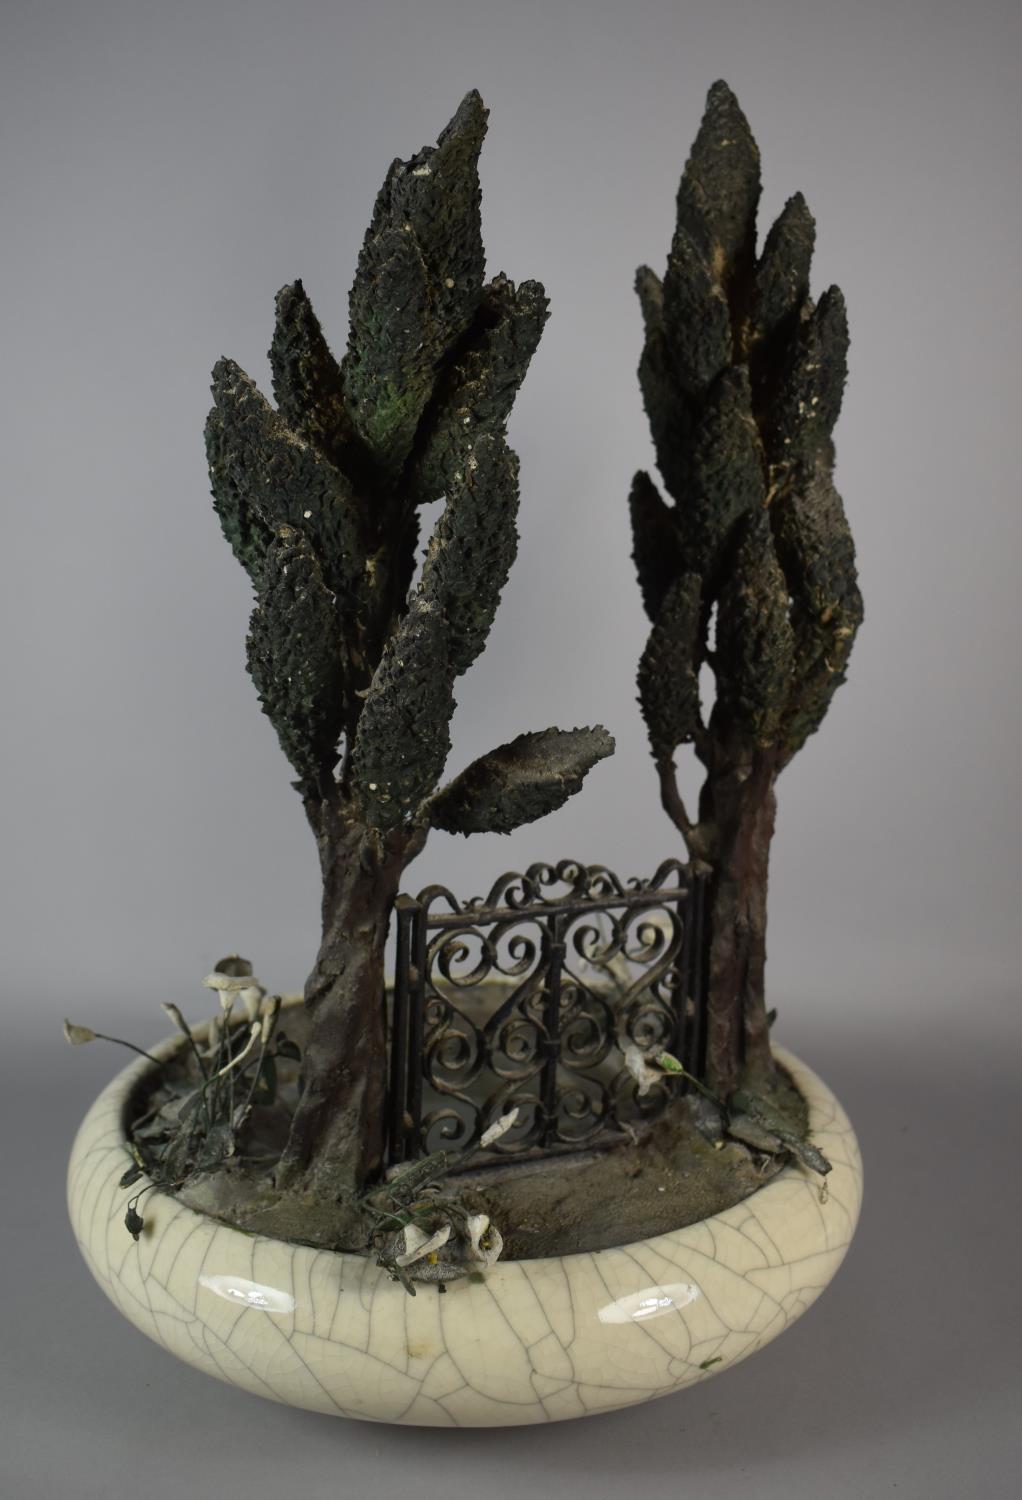 A Vintage Crackle Glaze Shallow Bowl Housing Holly Tree and Gate Diorama with Illuminated Pool, 31cm